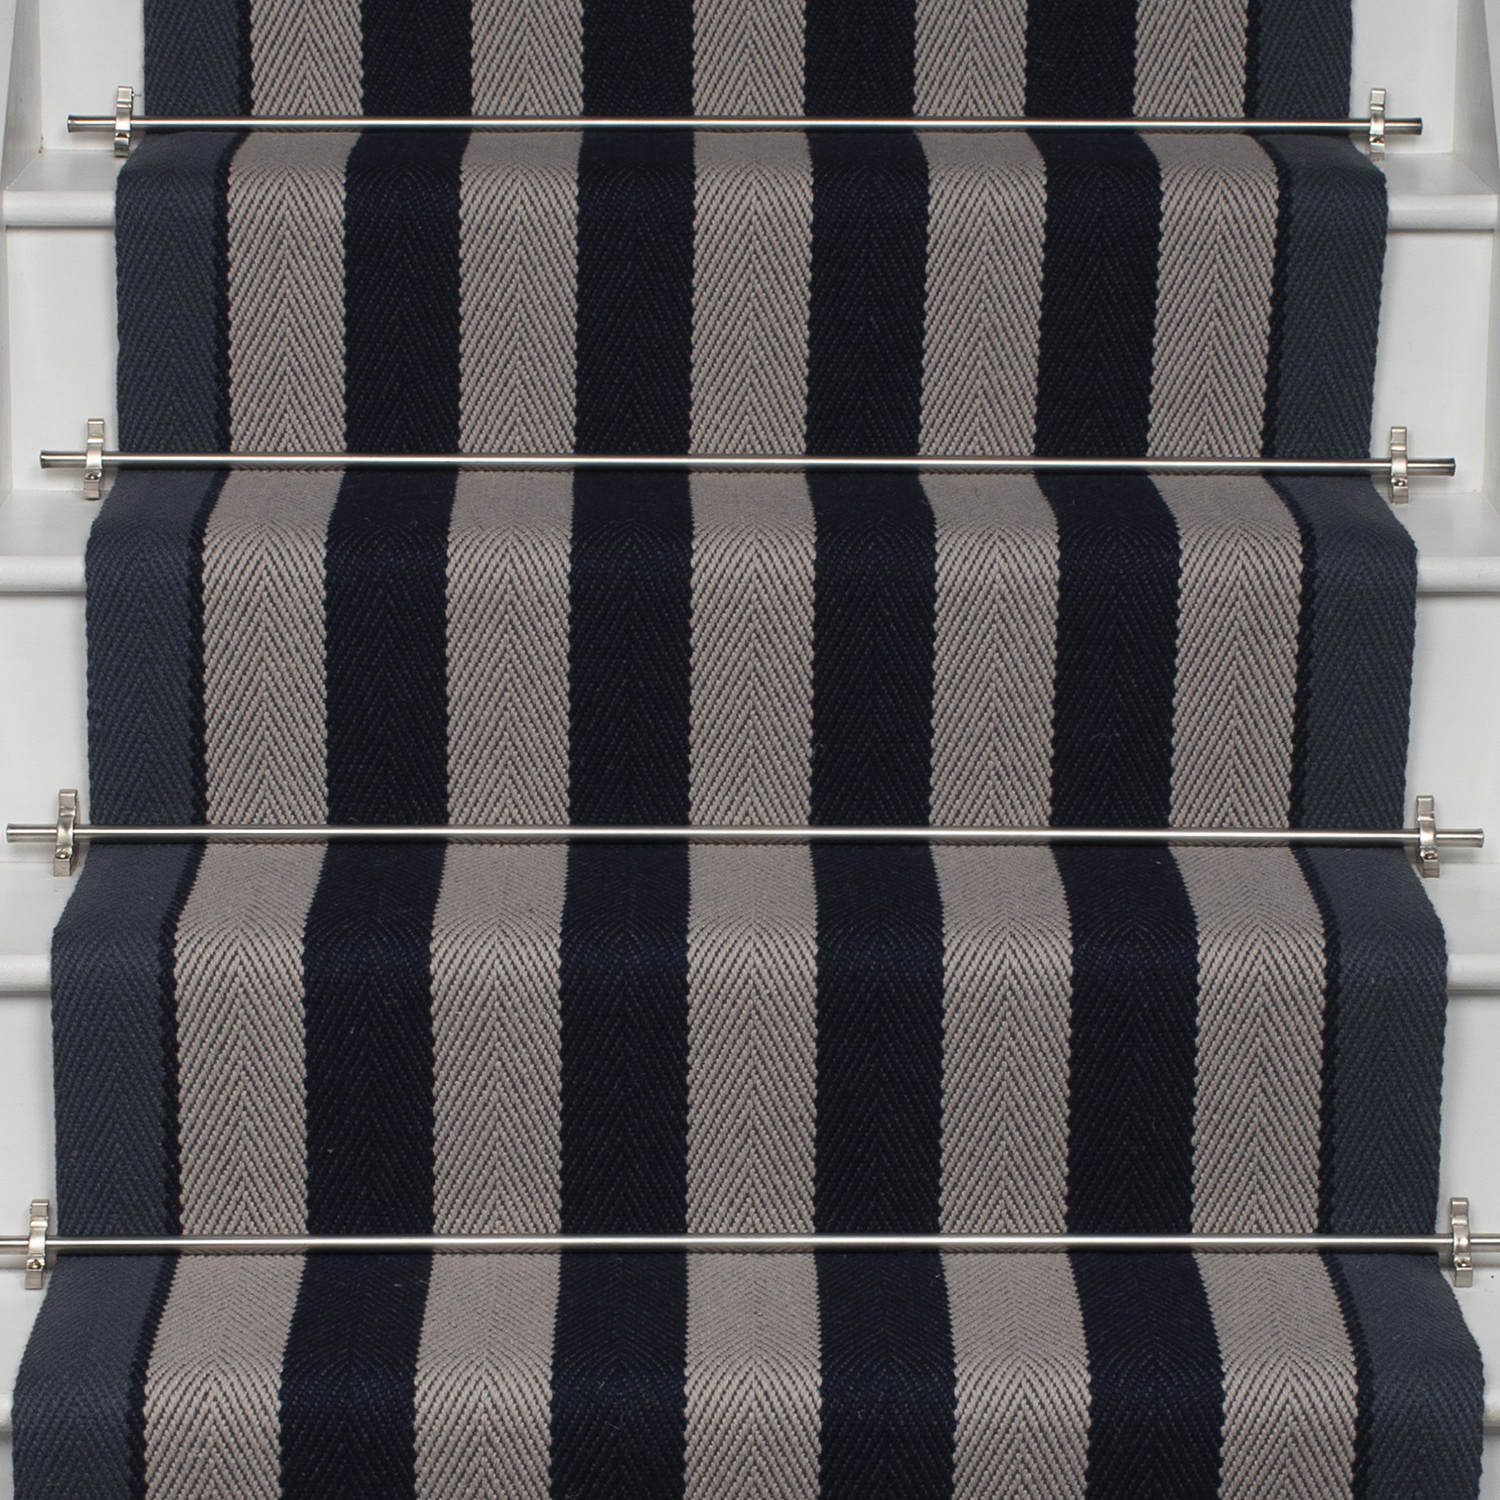 Fitzroy Midnight stair runner by Roger Oates